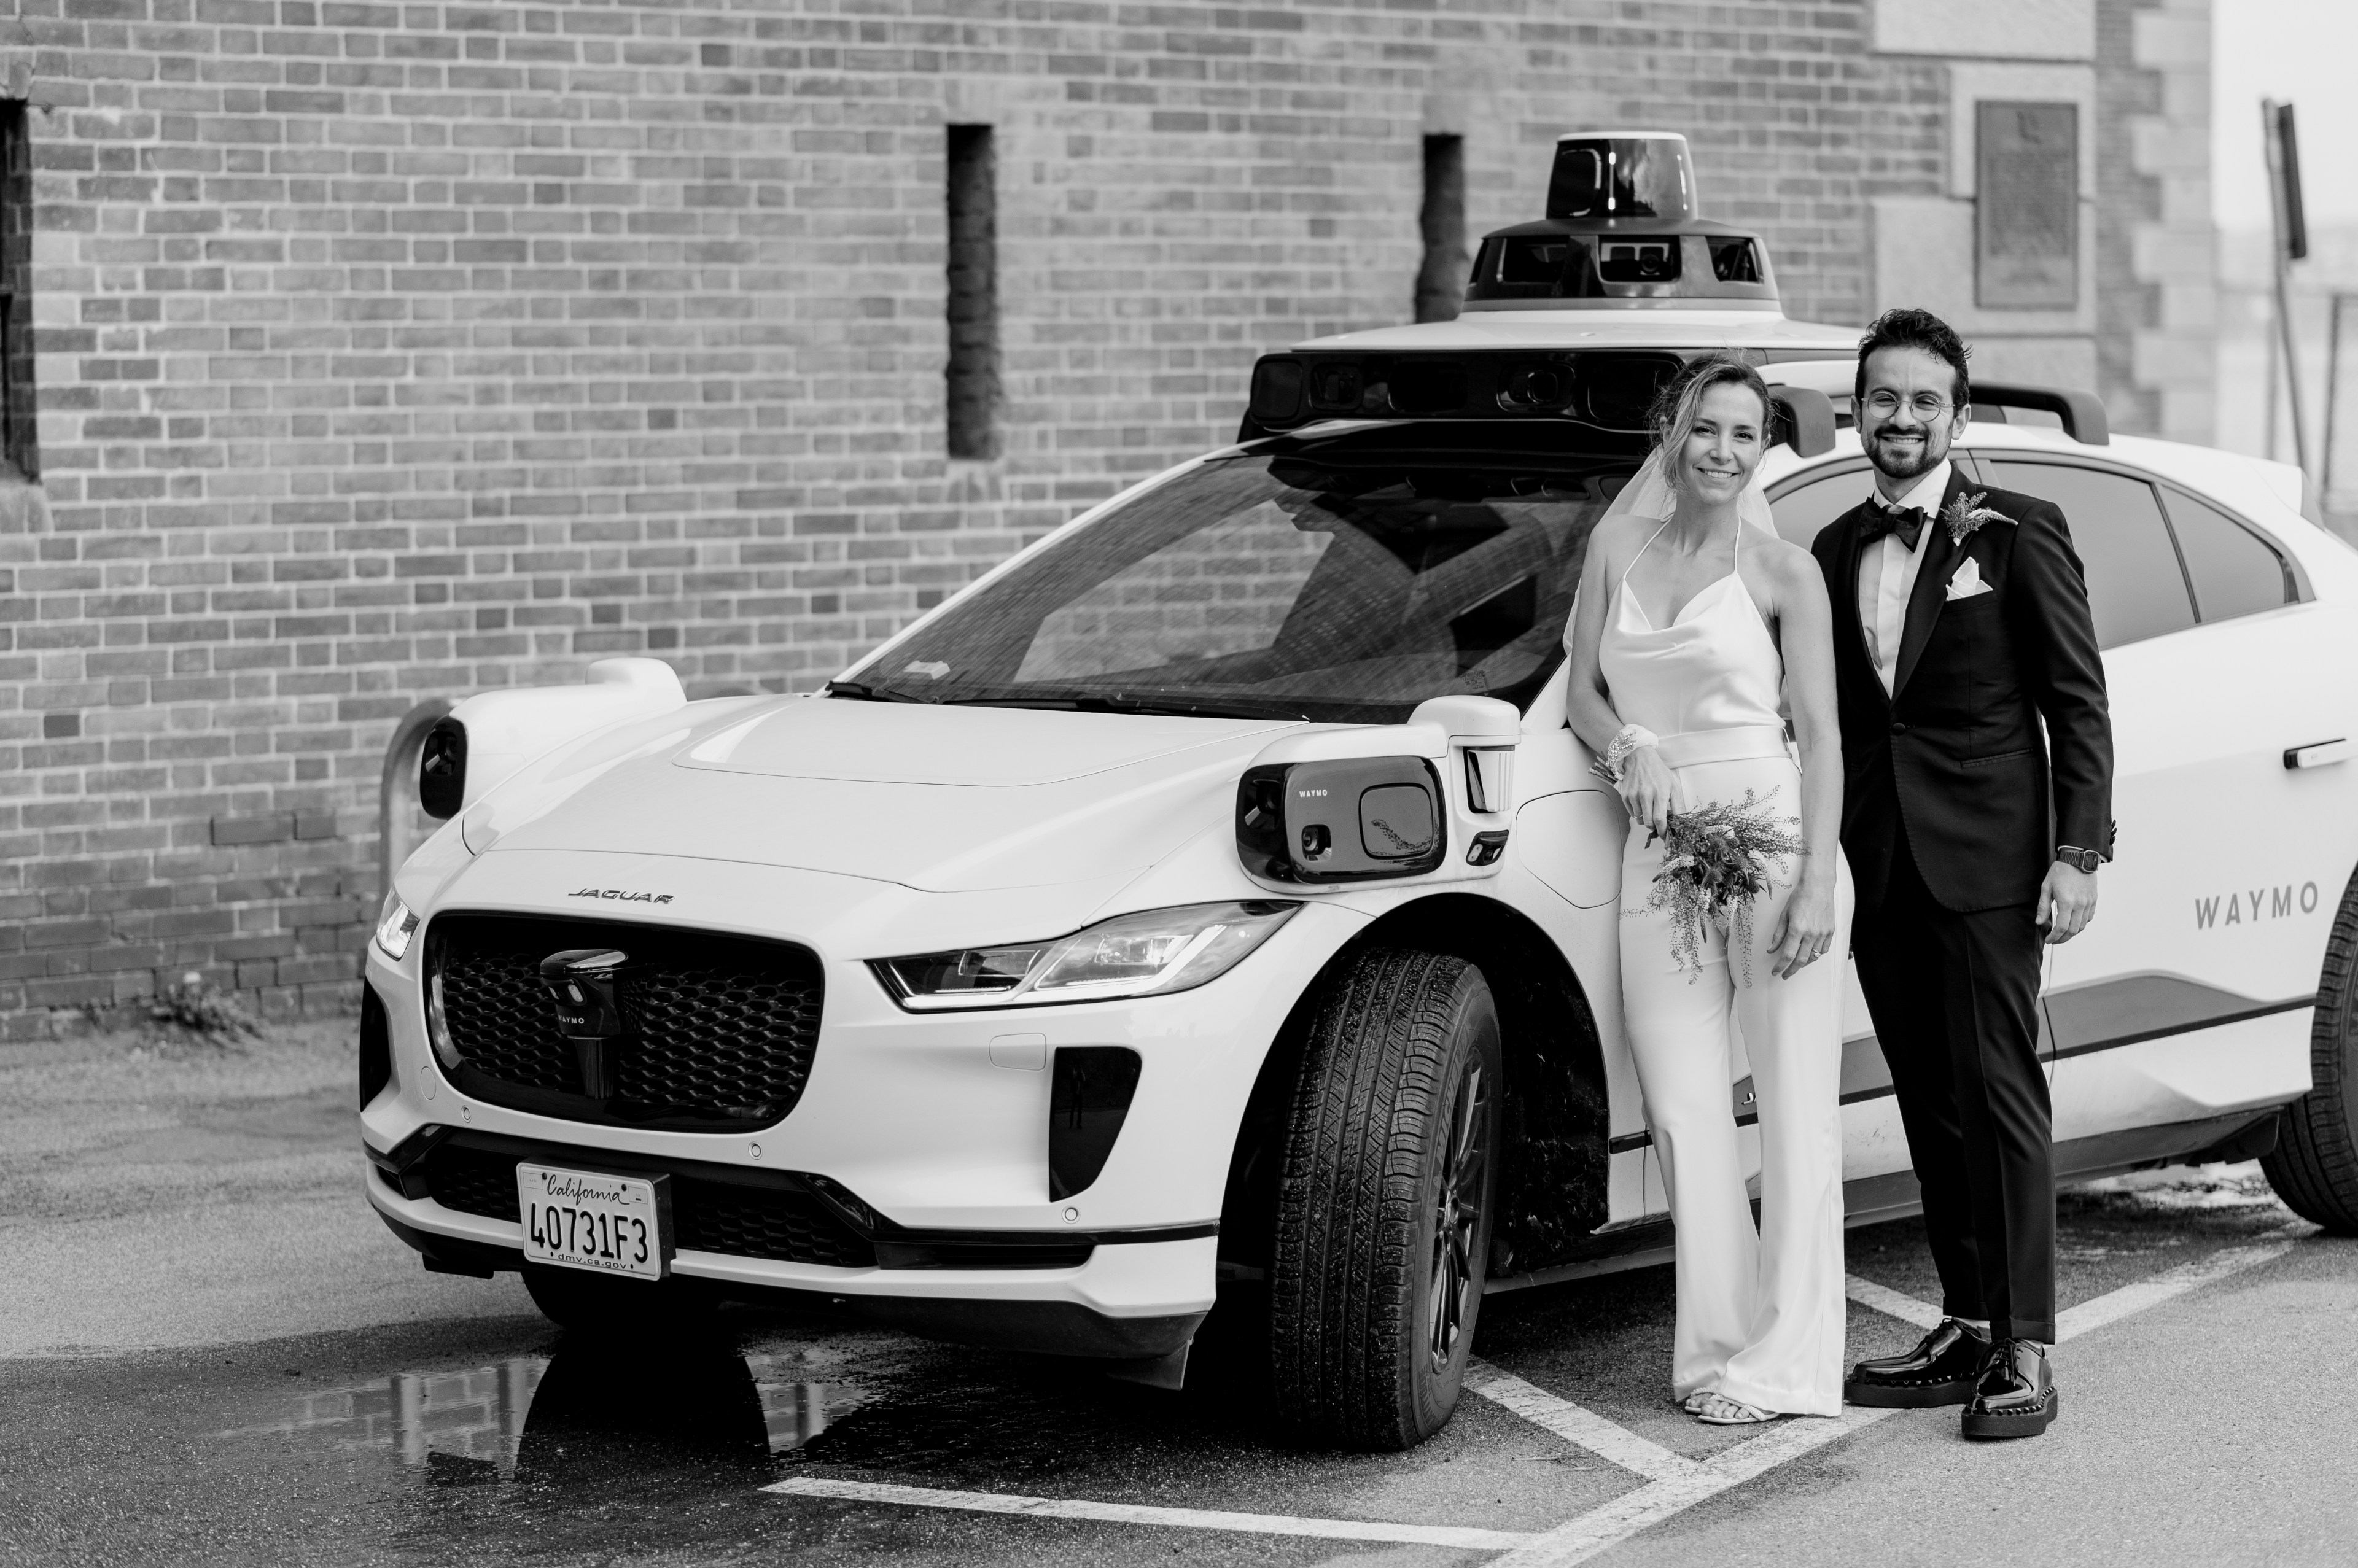 A couple in wedding attire stands by a self-driving car with sensors on the roof.